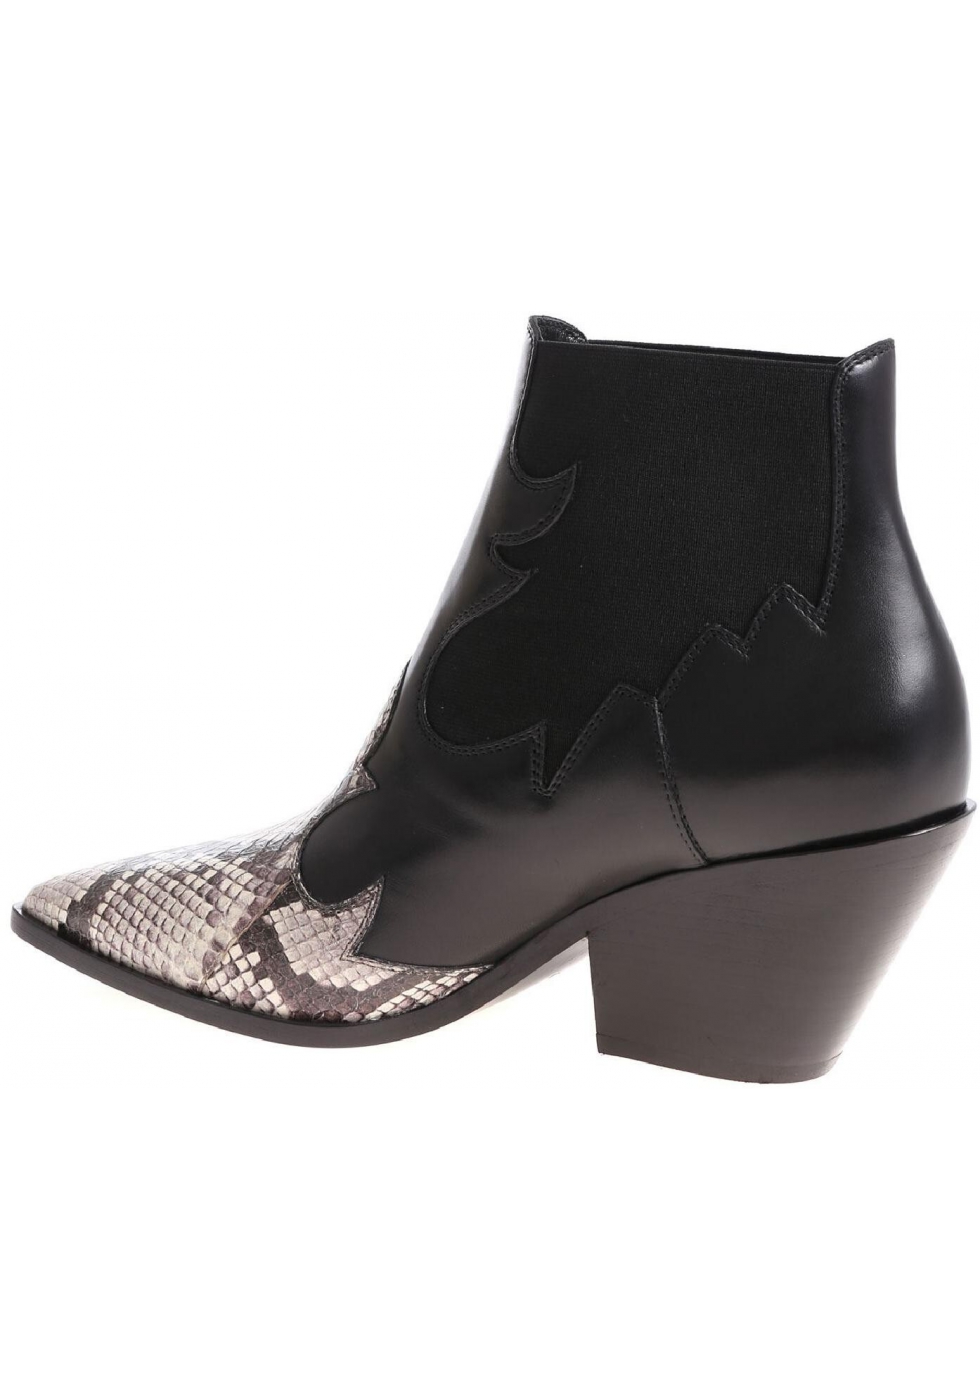 Casadei Daytime cowboy boot in black lether with ayers inserts ...